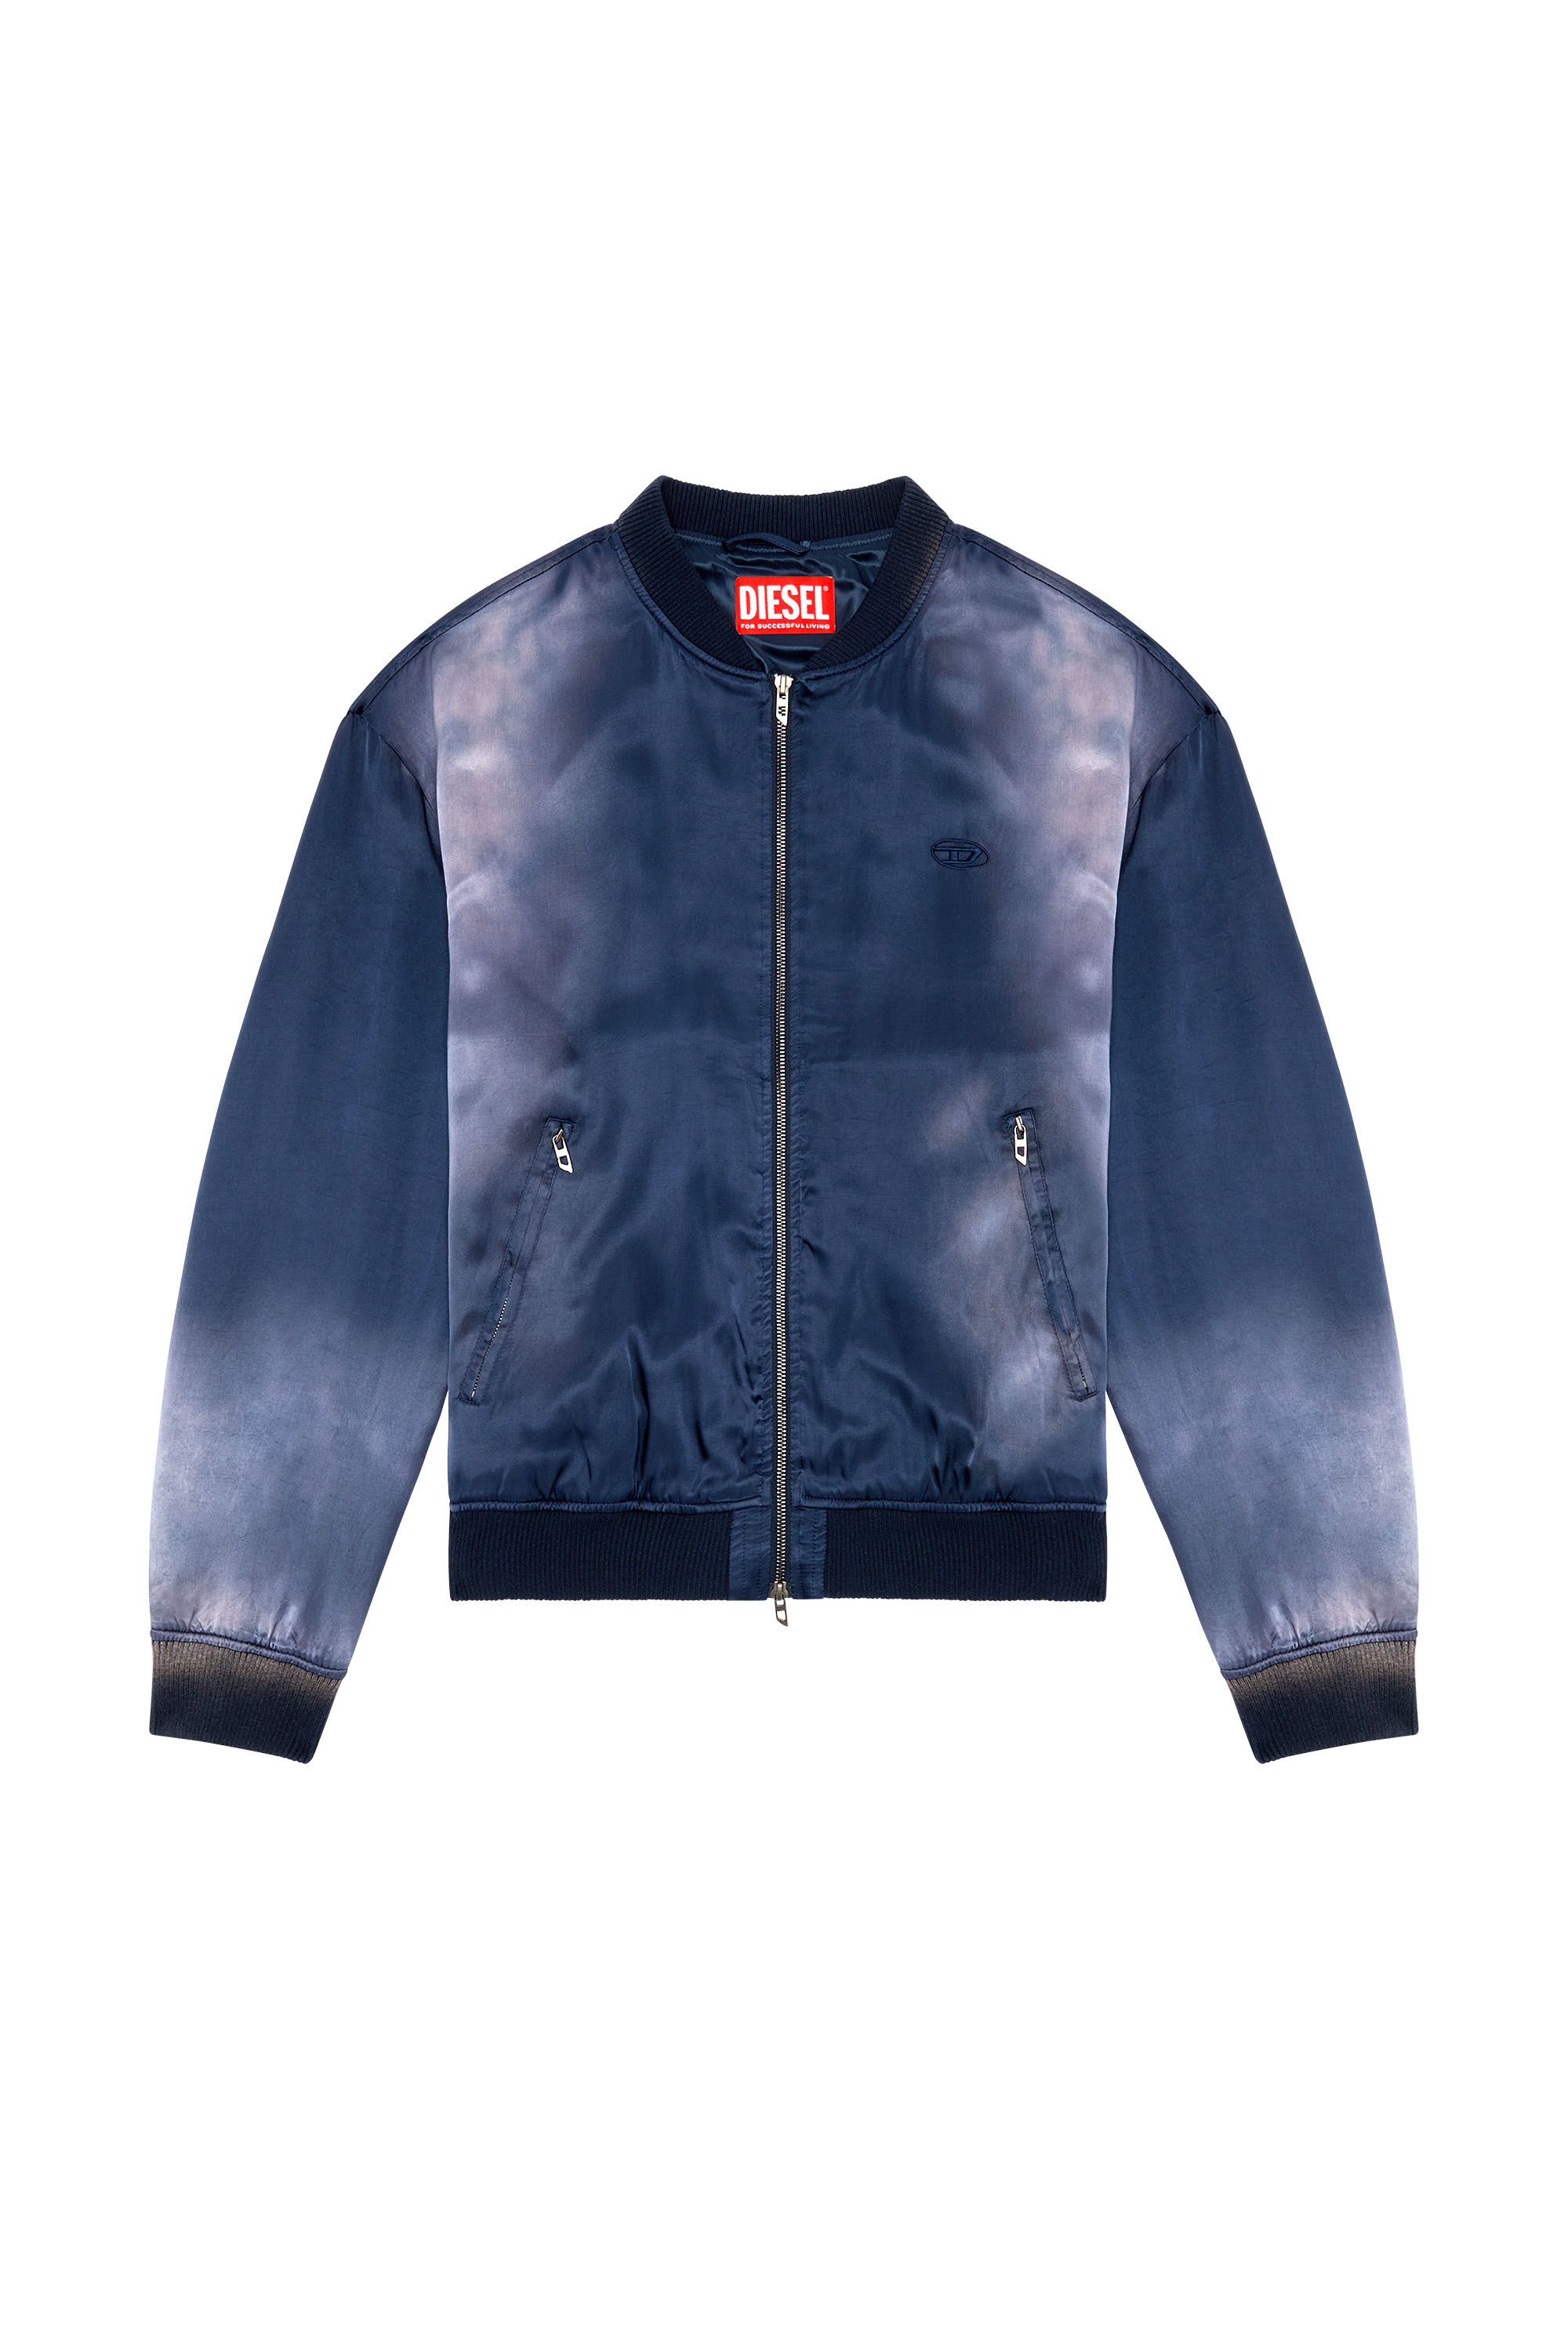 Diesel - J-MARTEX, Man Satin bomber jacket with faded effect in Blue - Image 2